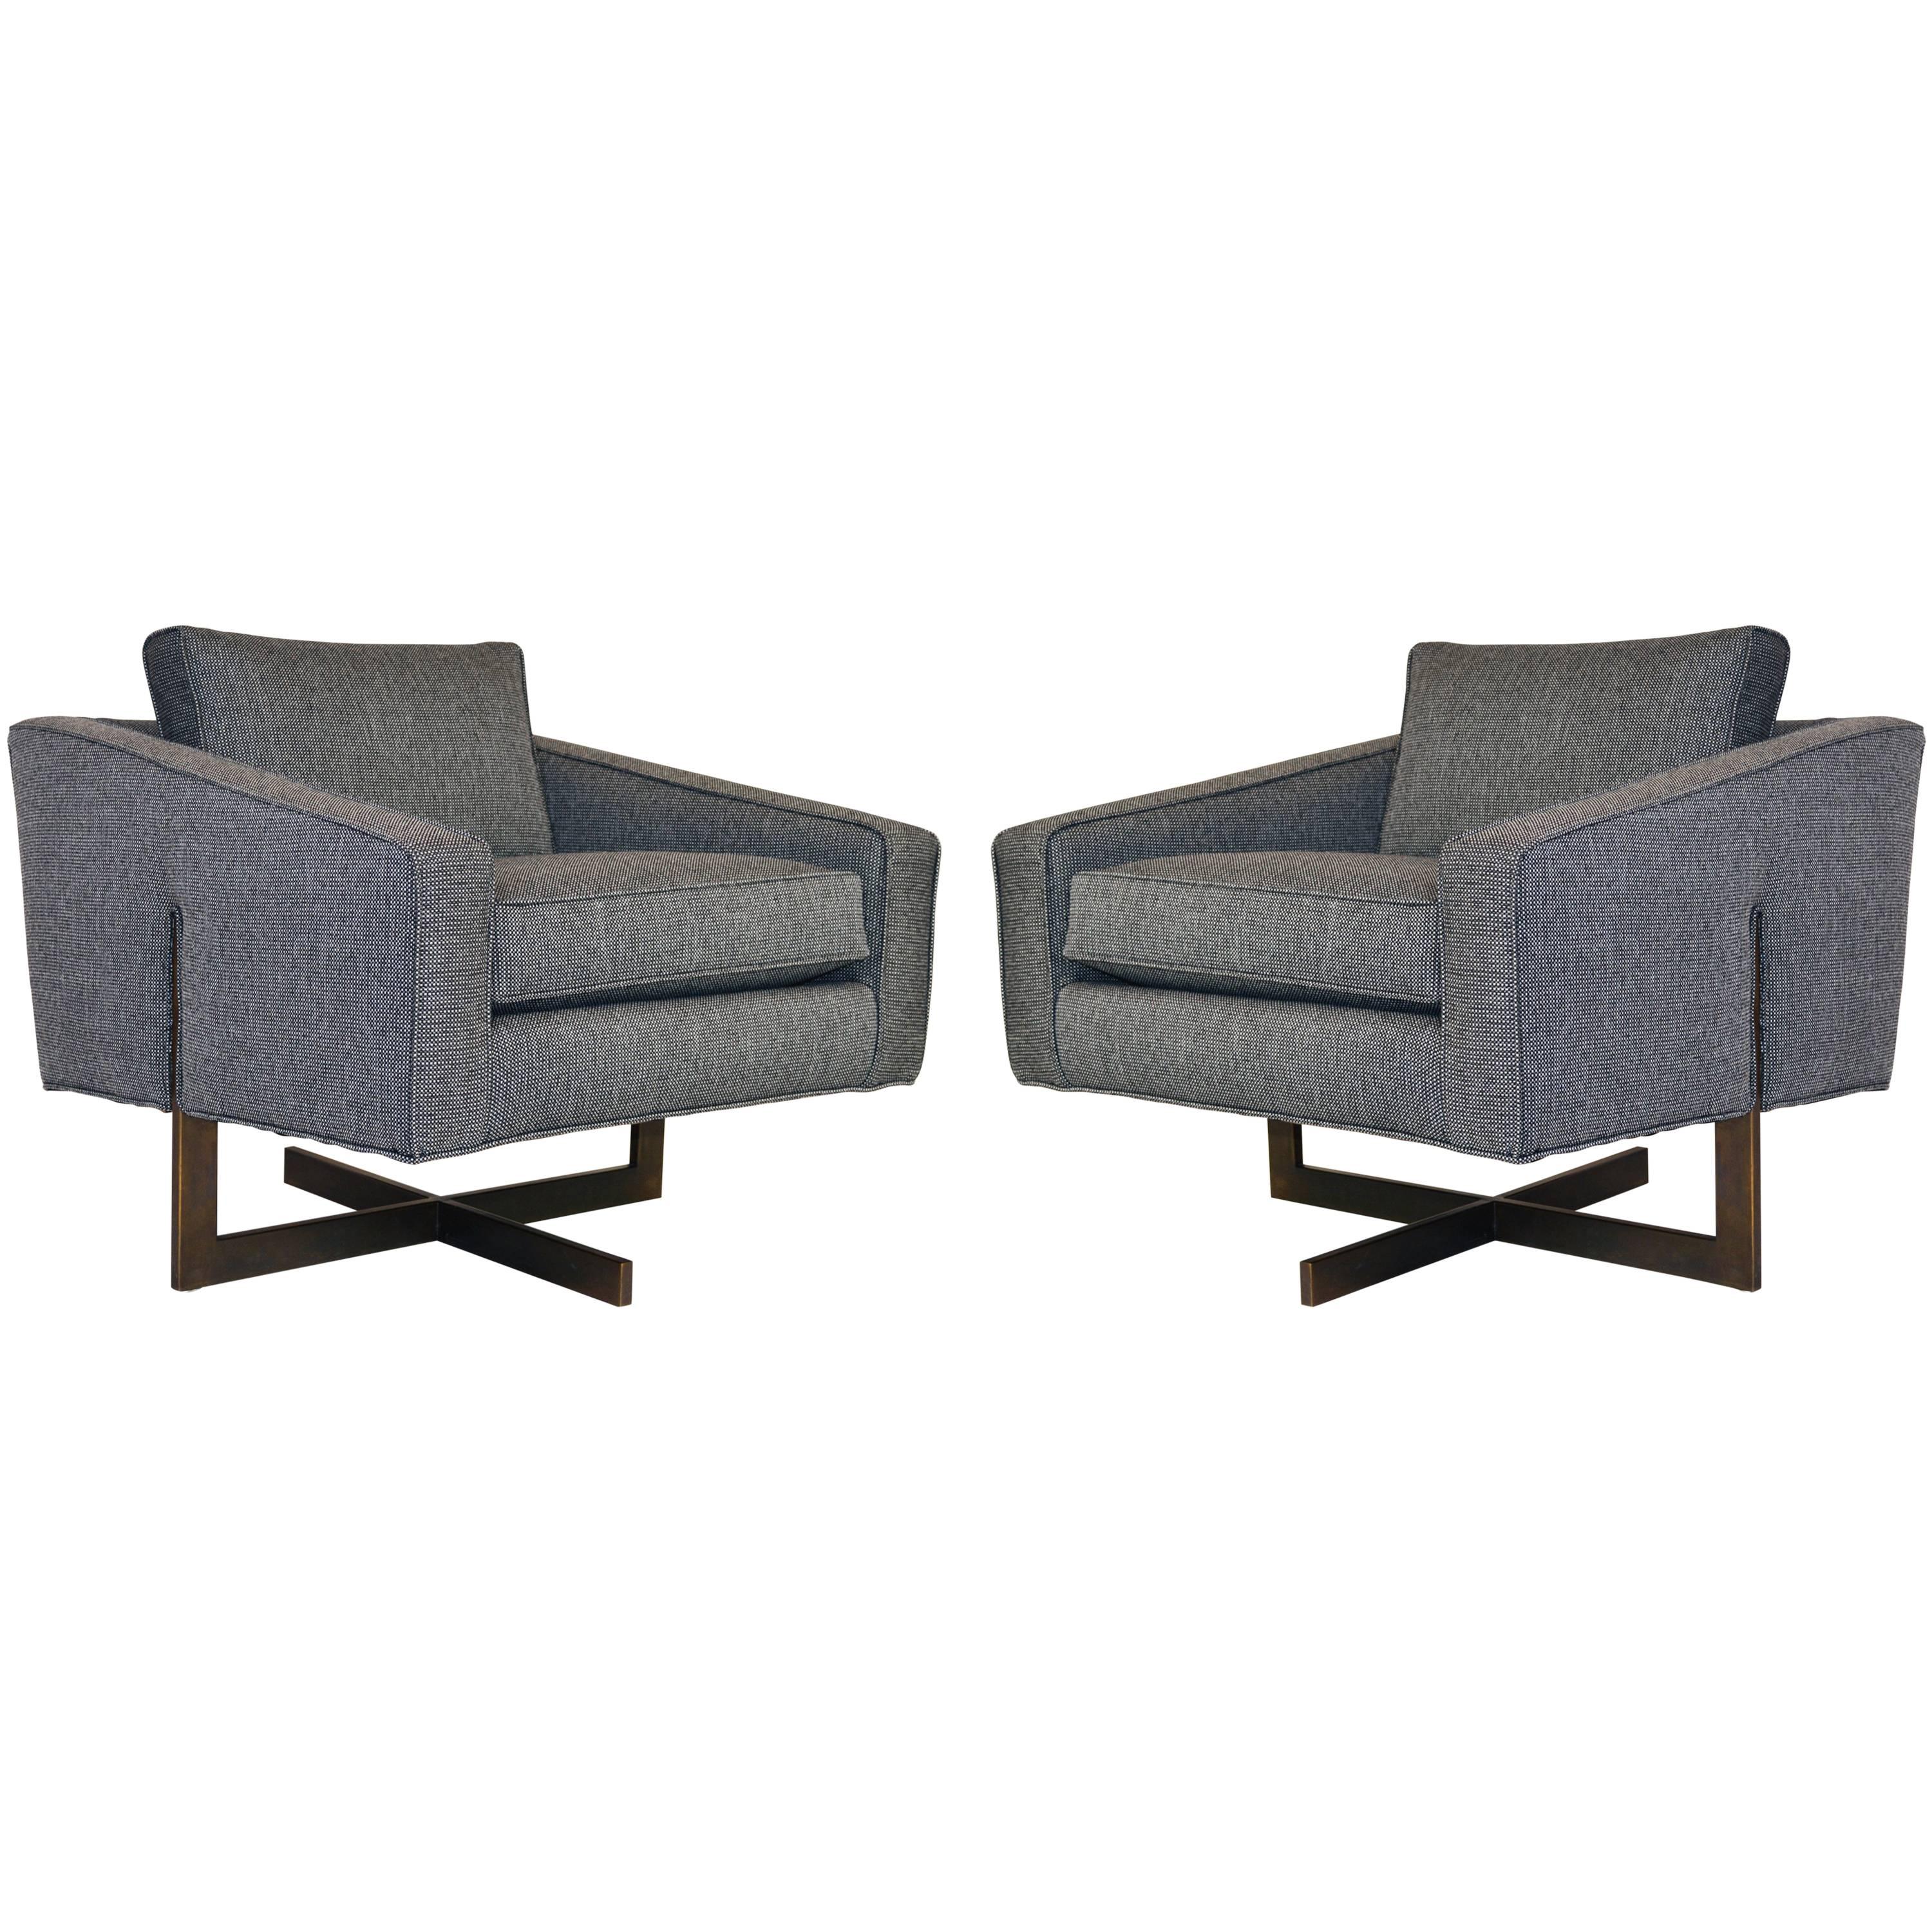 Pair of Mid-Century Modern Cantilever Chairs